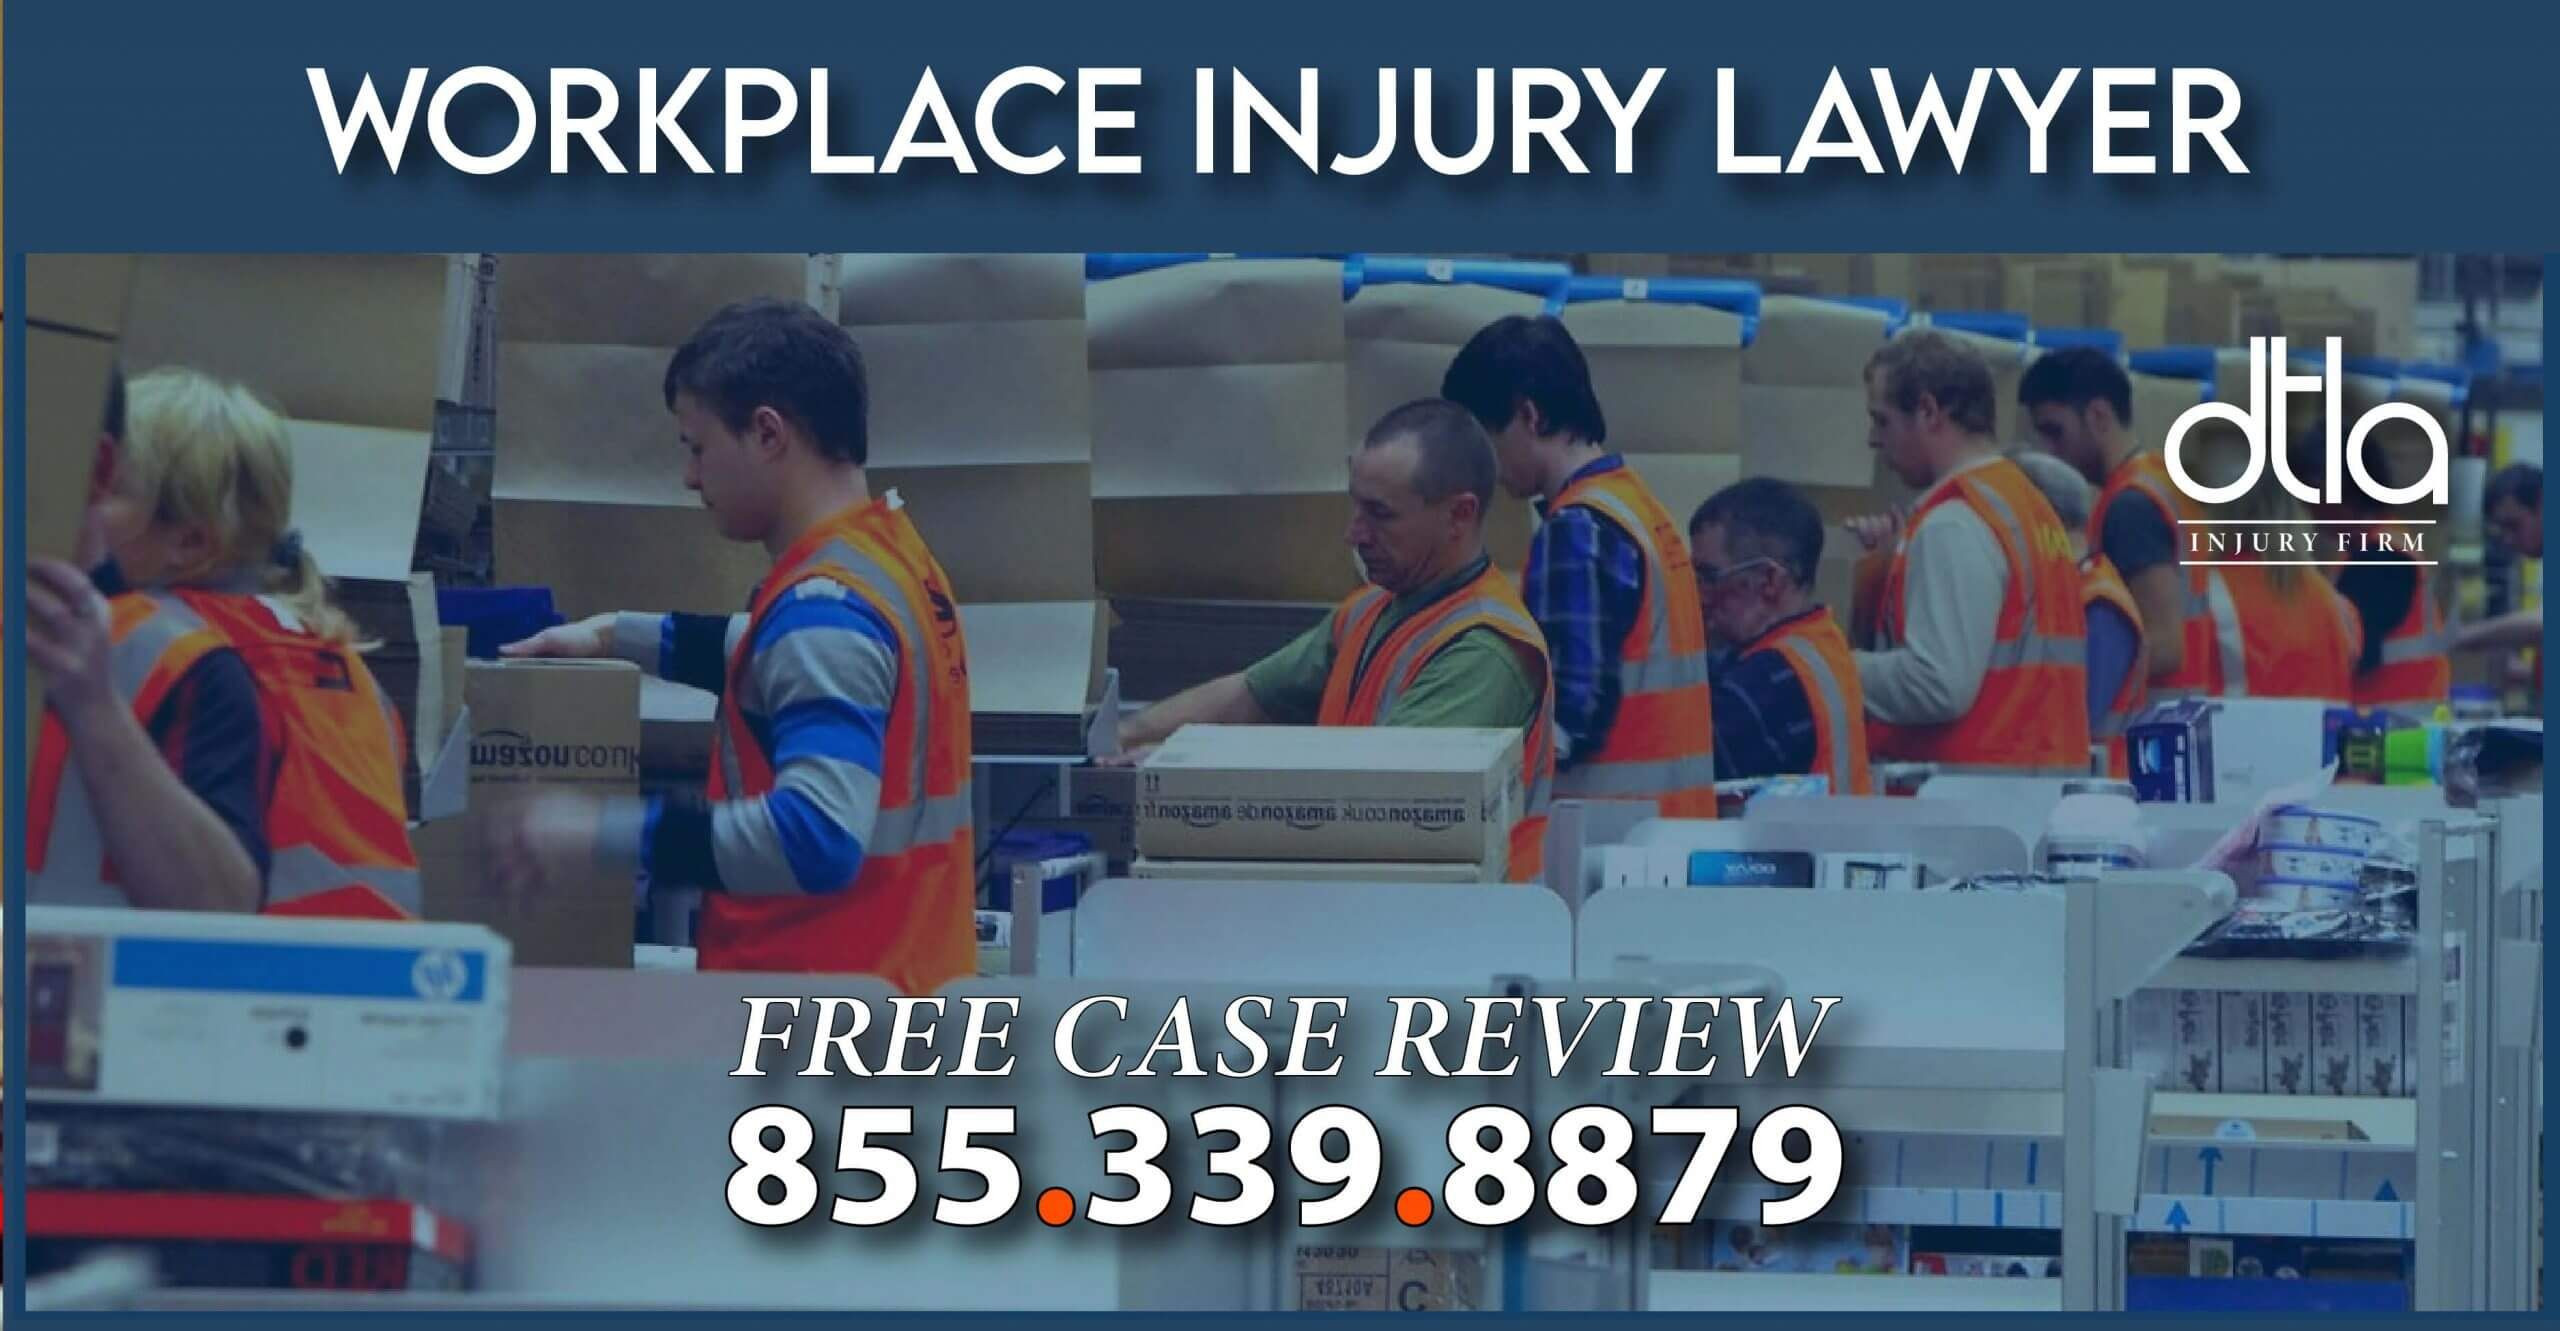 amazon workplace injury lawyer accident attorney incident compensation sue